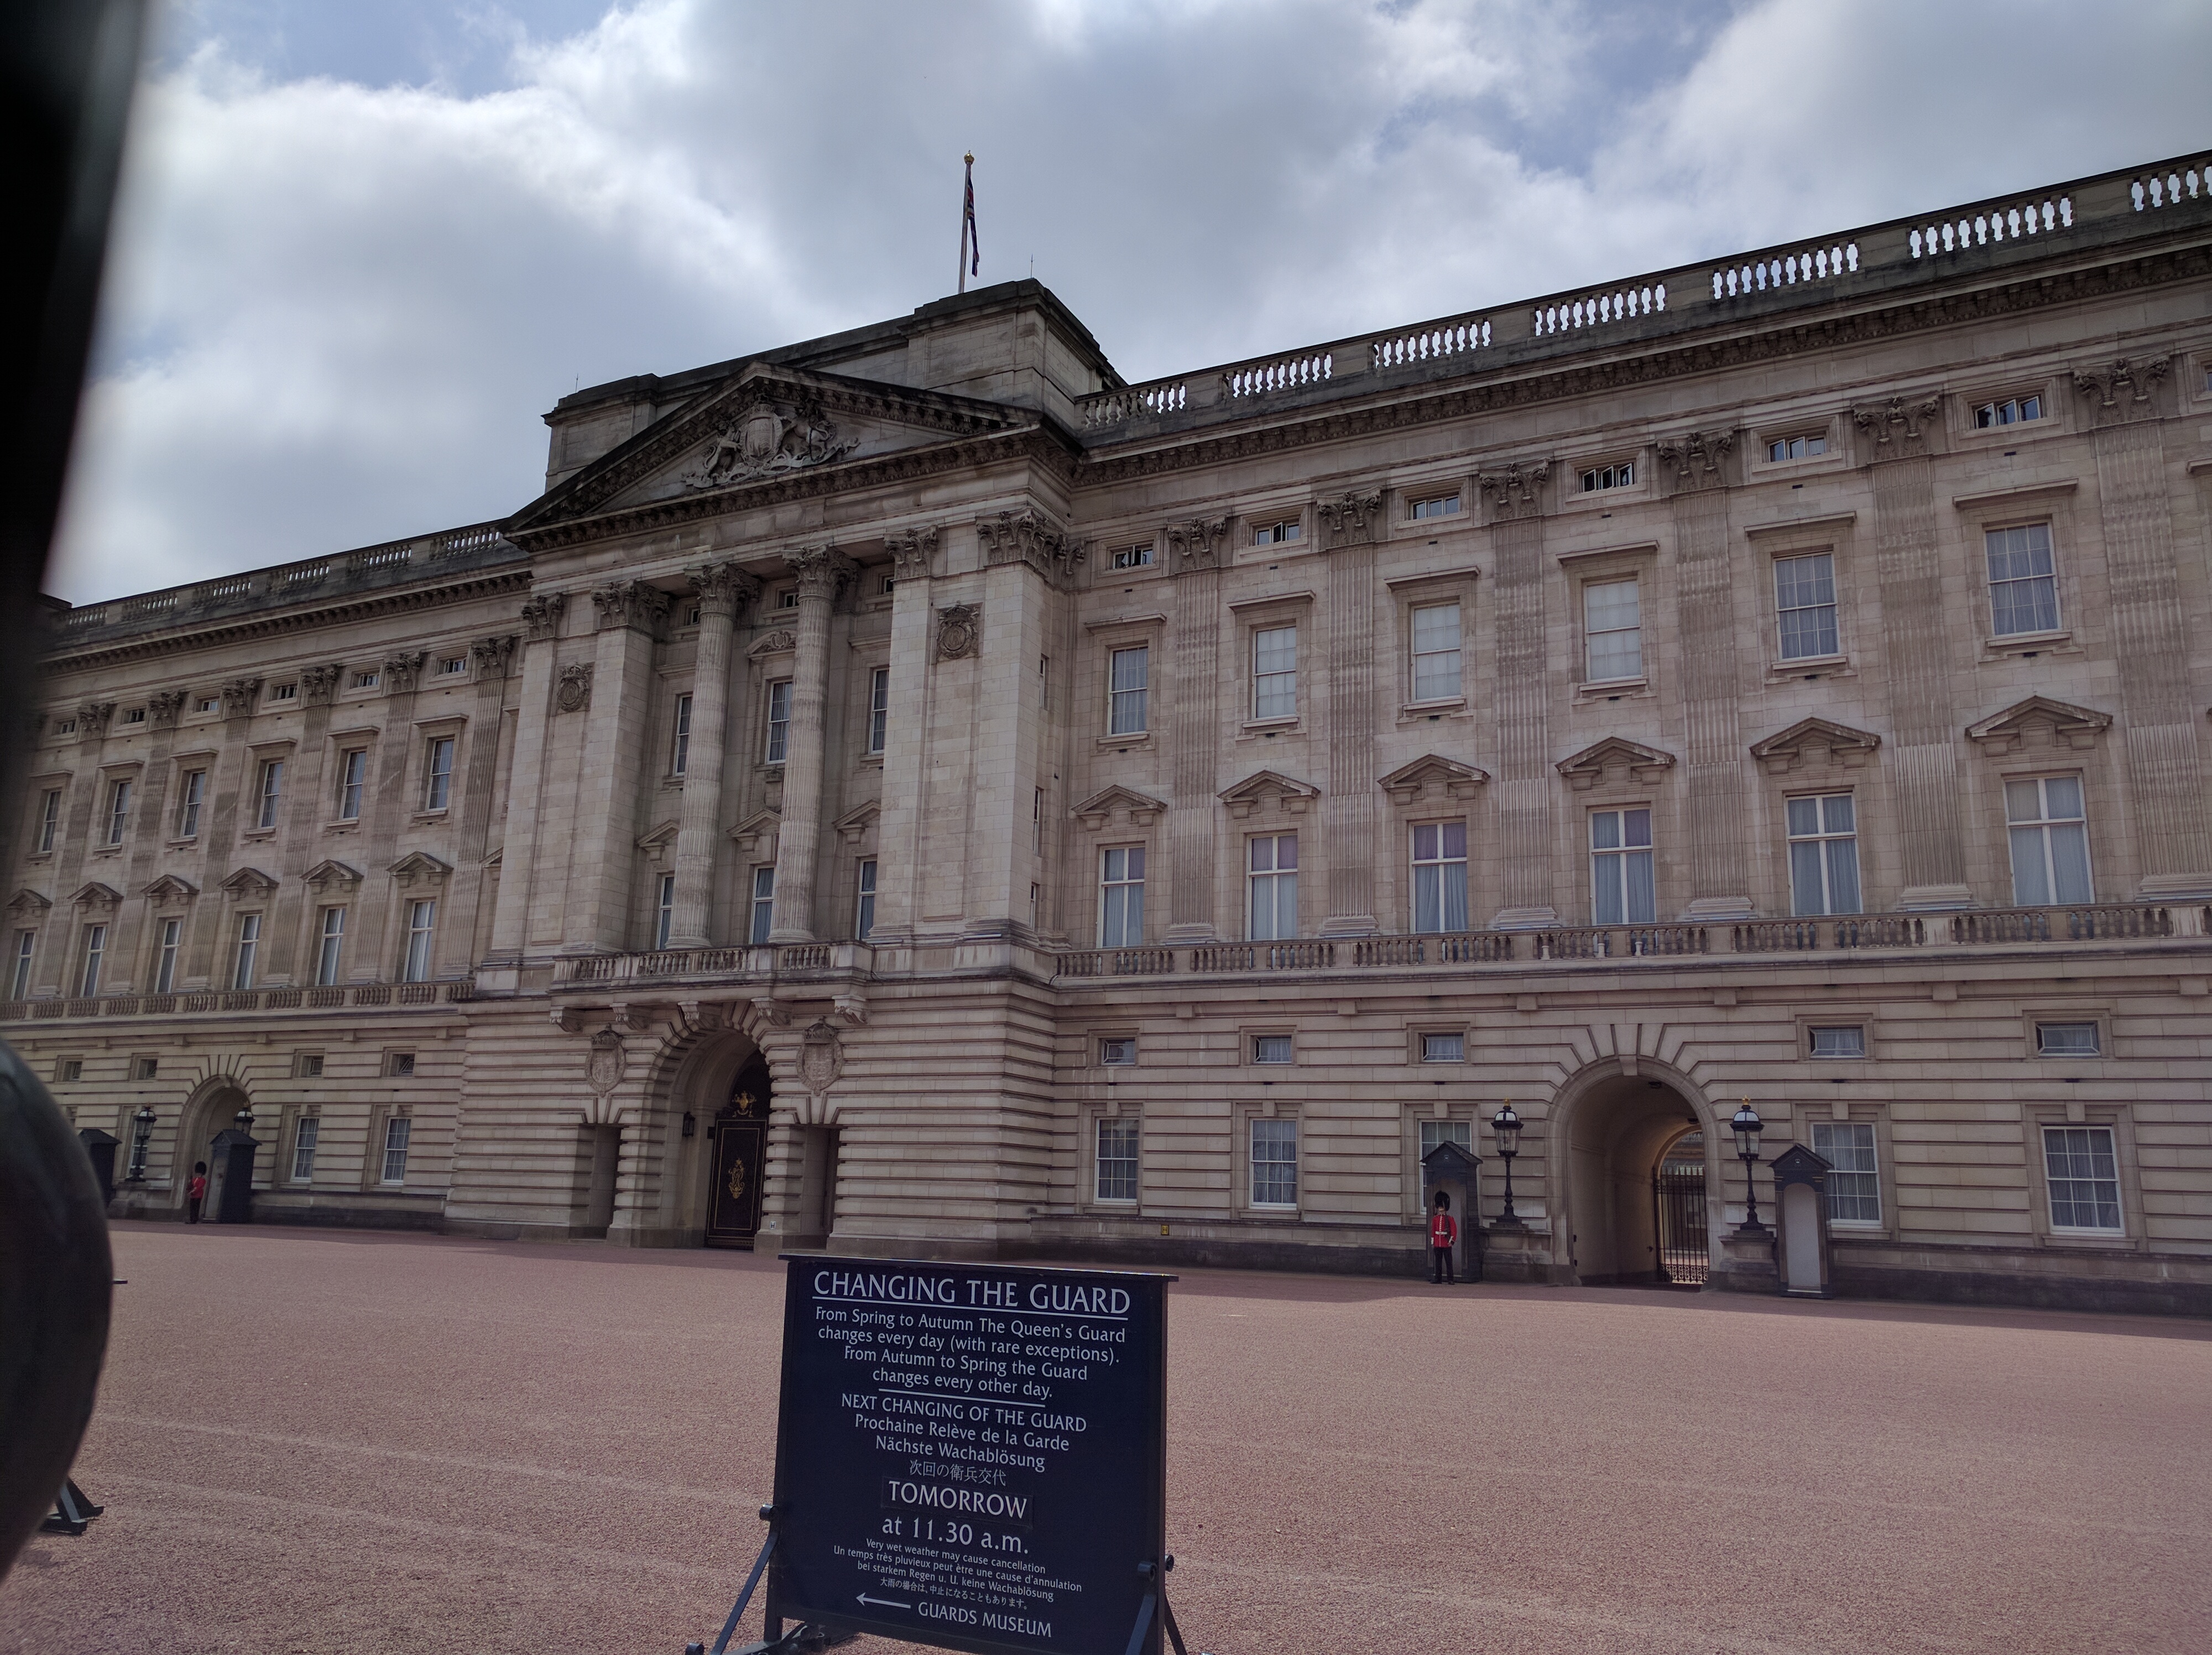 We went to Buckingham Palace to see the outside, but nothing inside. We DID actually visit and tour Kensington Palace, which is close to our flat.